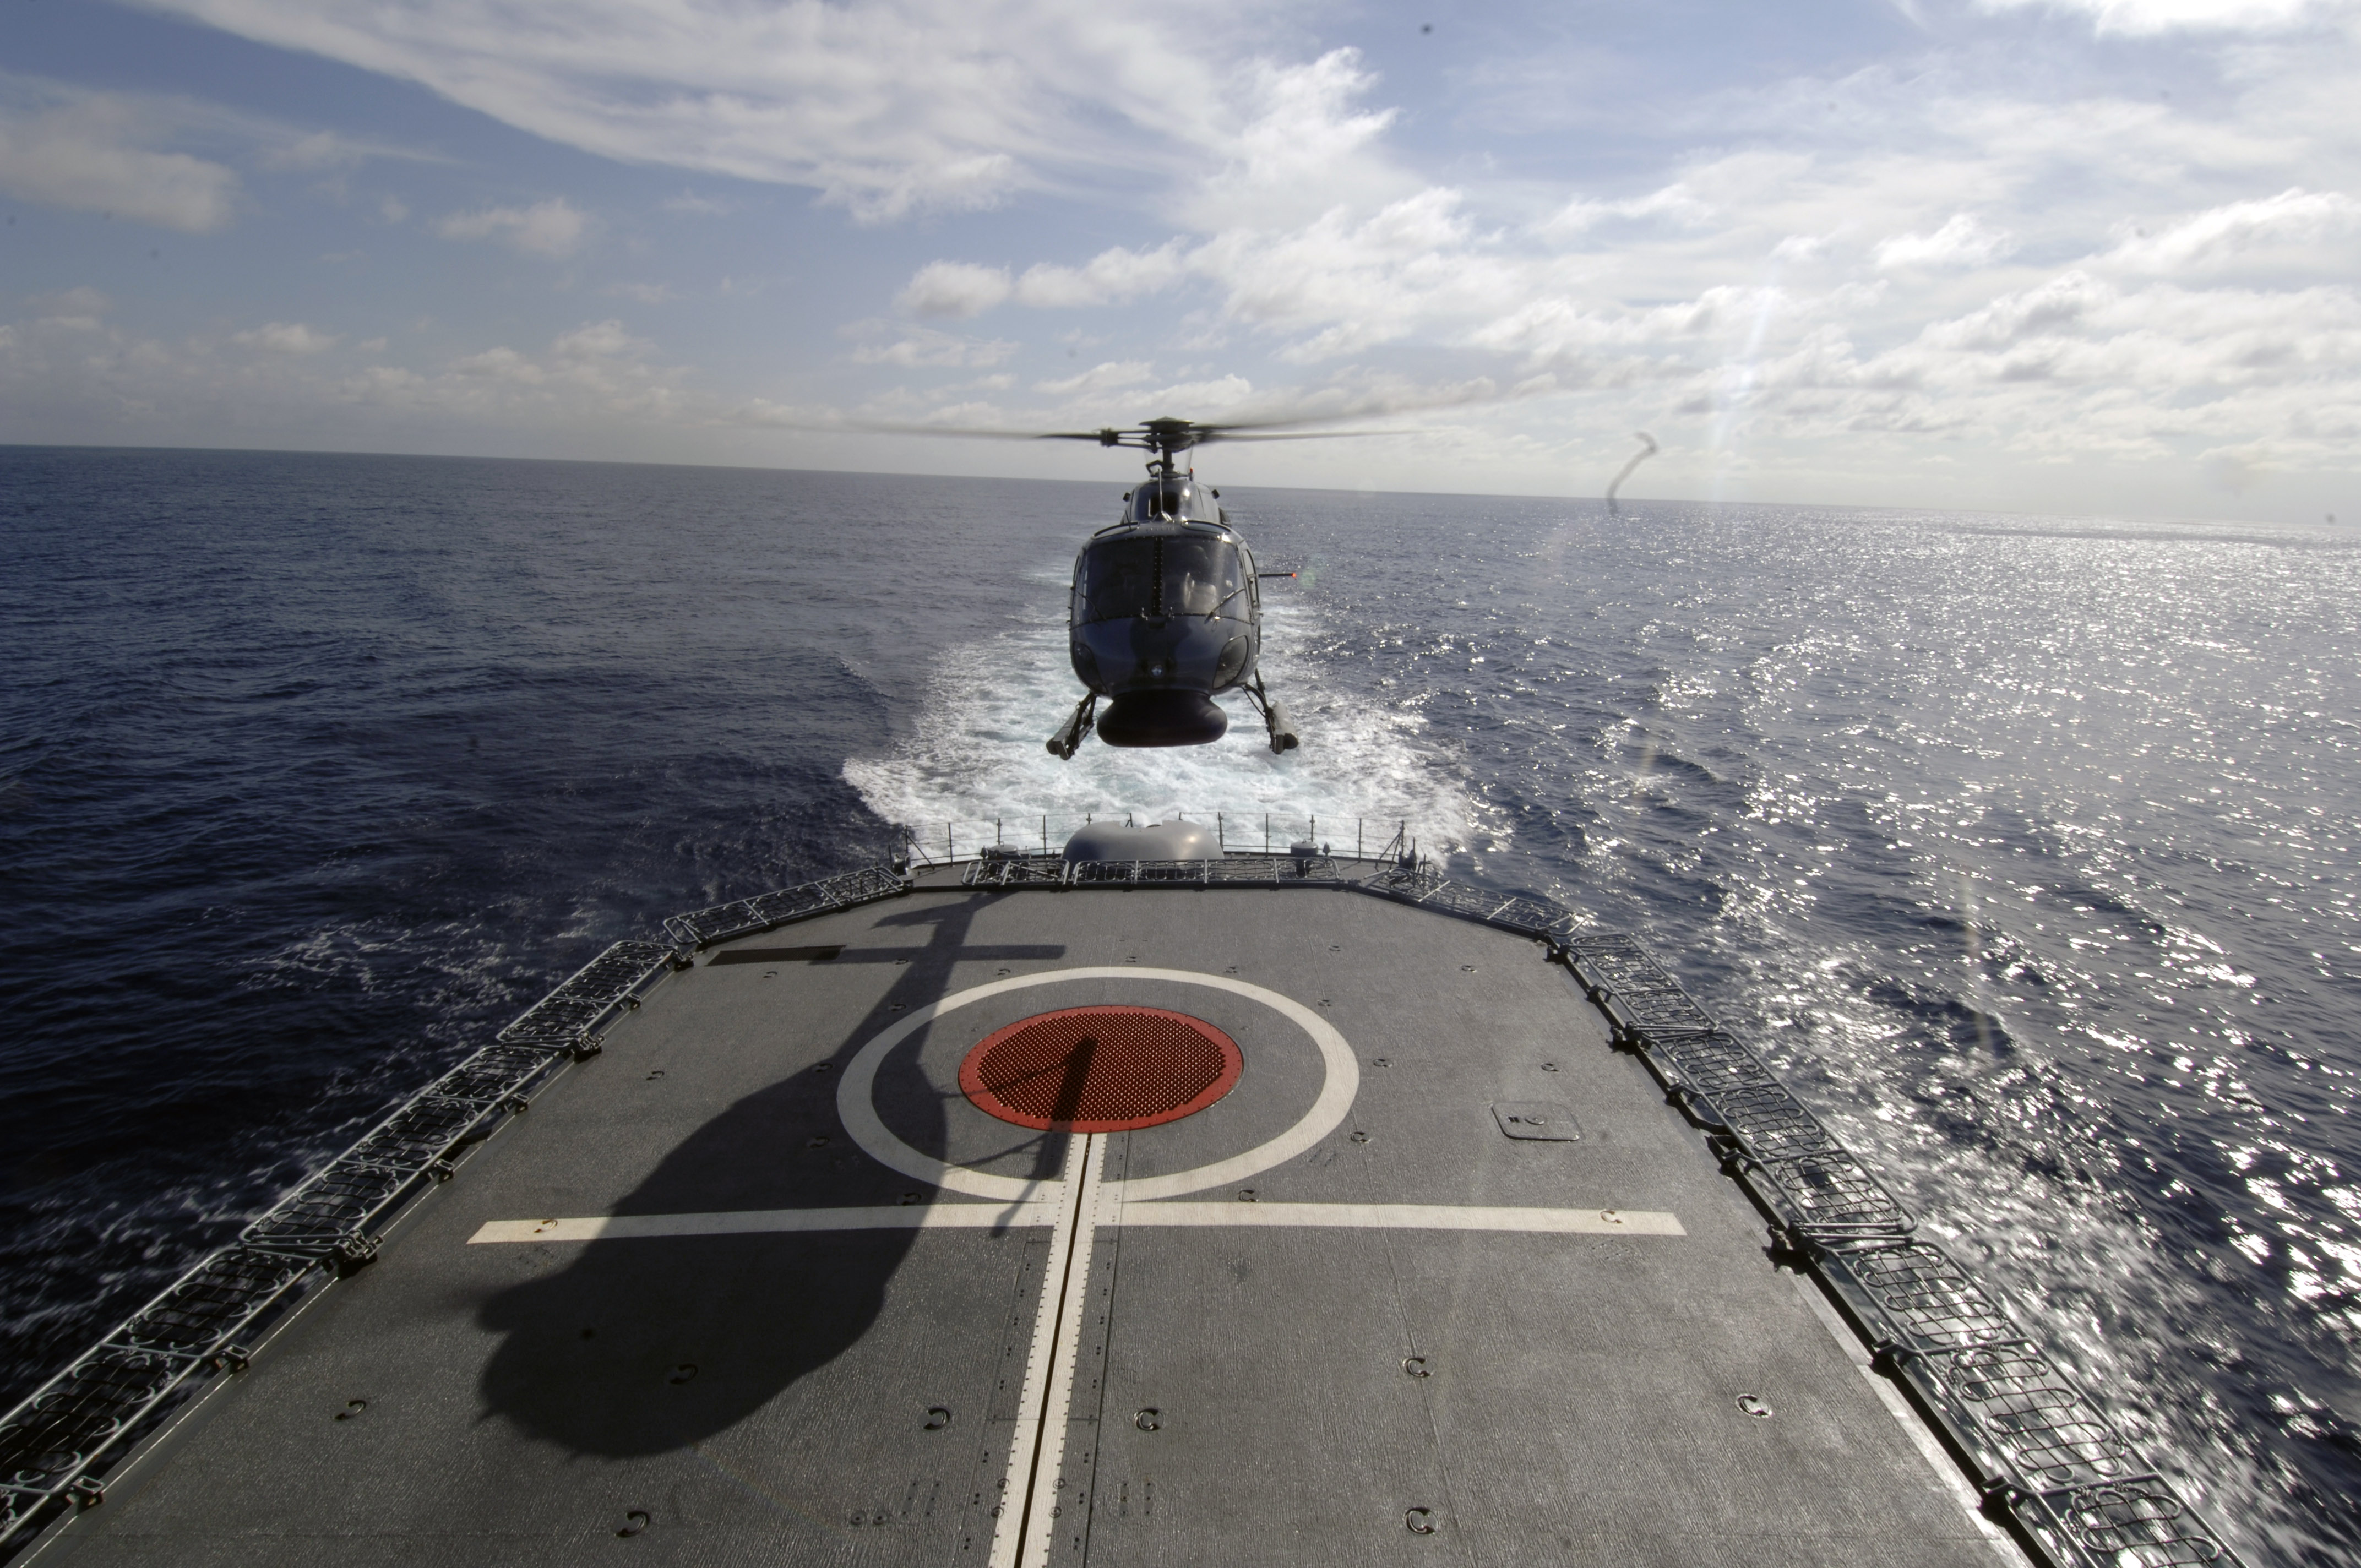 US Navy 060828-N-6240R-001 A Colombian helicopter pilot lines up for landing aboard the Colombian frigate ARC (Armada Republica de Colombia) Antioquia (FL 53) during exercise PANAMAX 2006